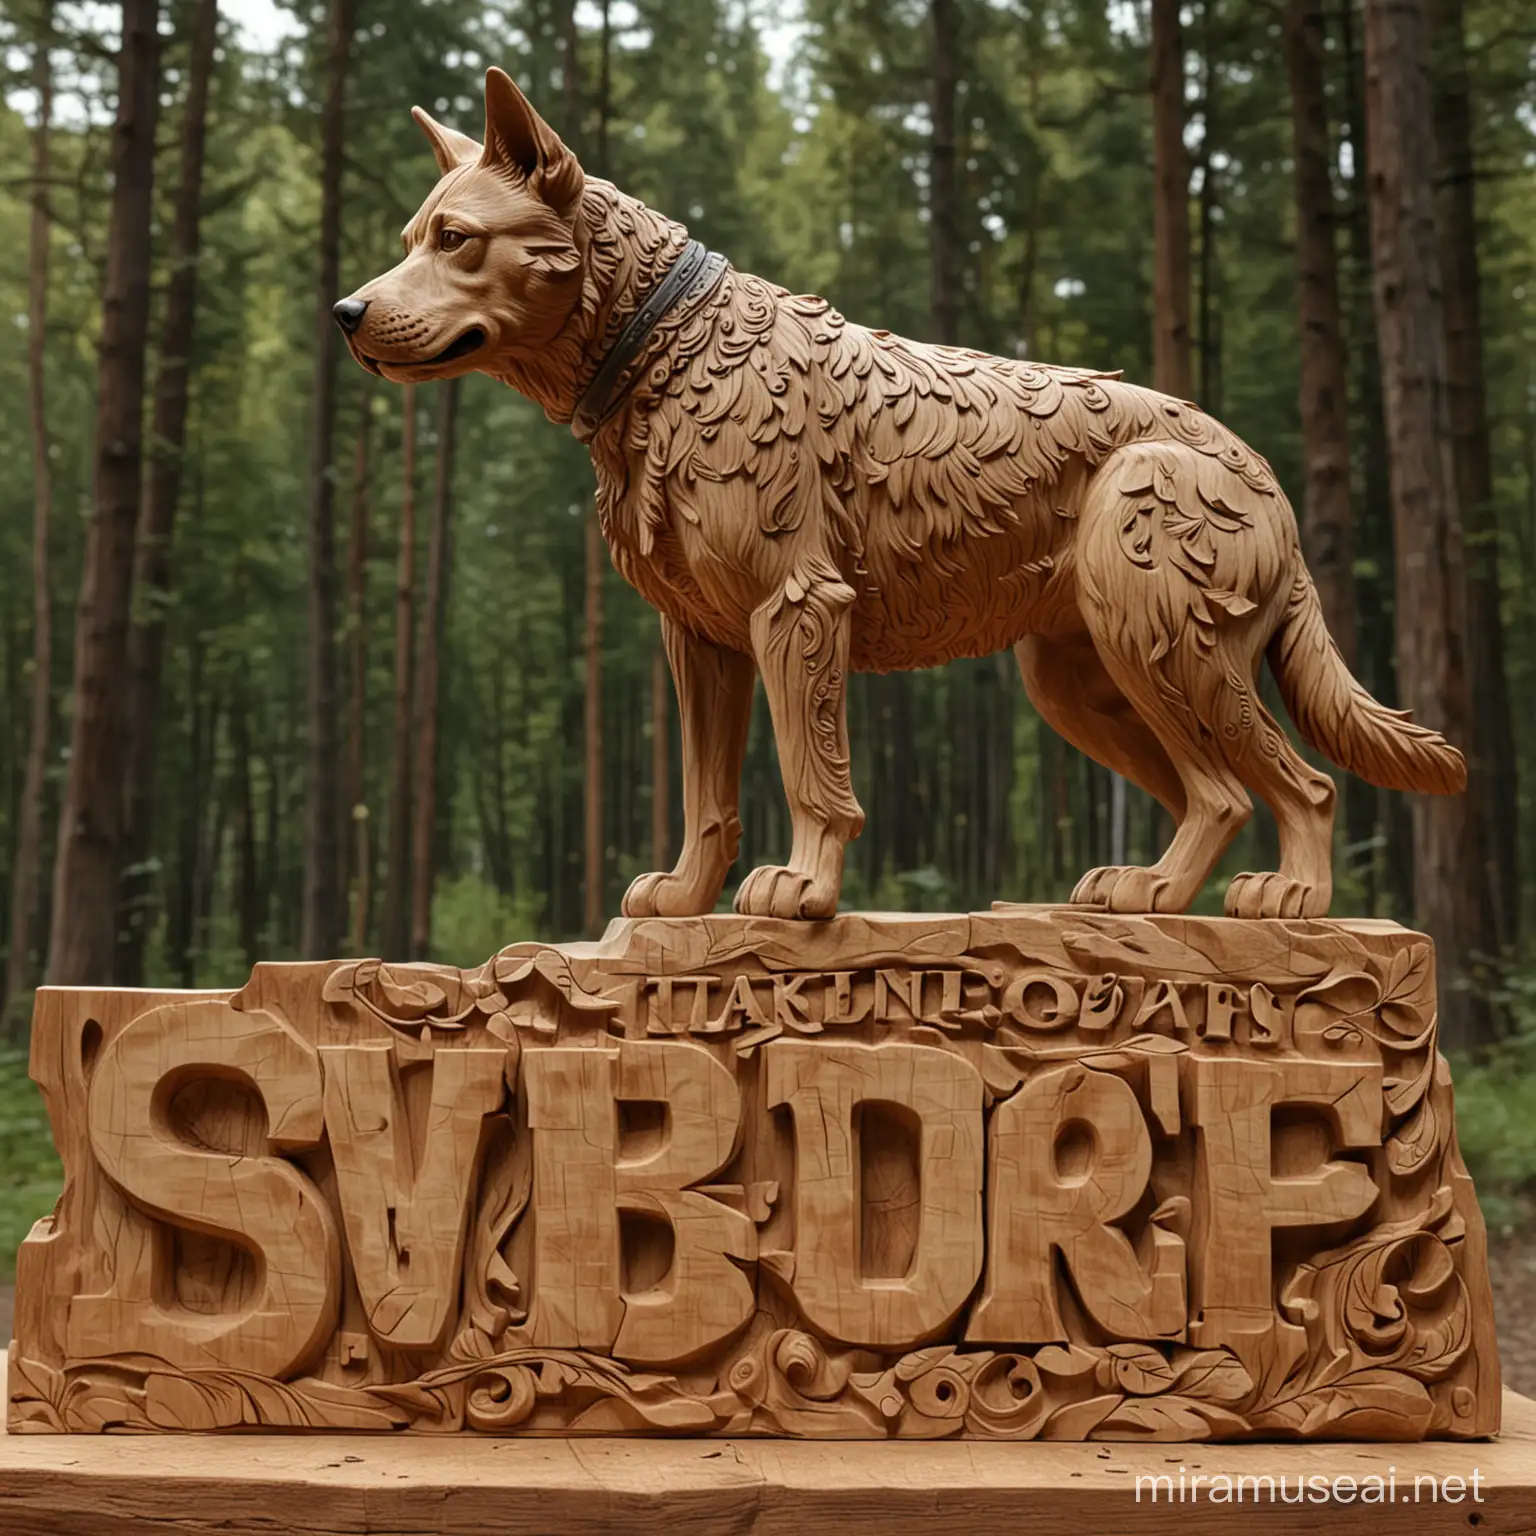 carving three dimensional sculpture of a dog, made out of wood that stands fully upright, a man wearing a vest and has tattoos working to make the carving, carve the words "By Paul" under the sculpture. Forest background. Realistic 180k, UHD, make it real.